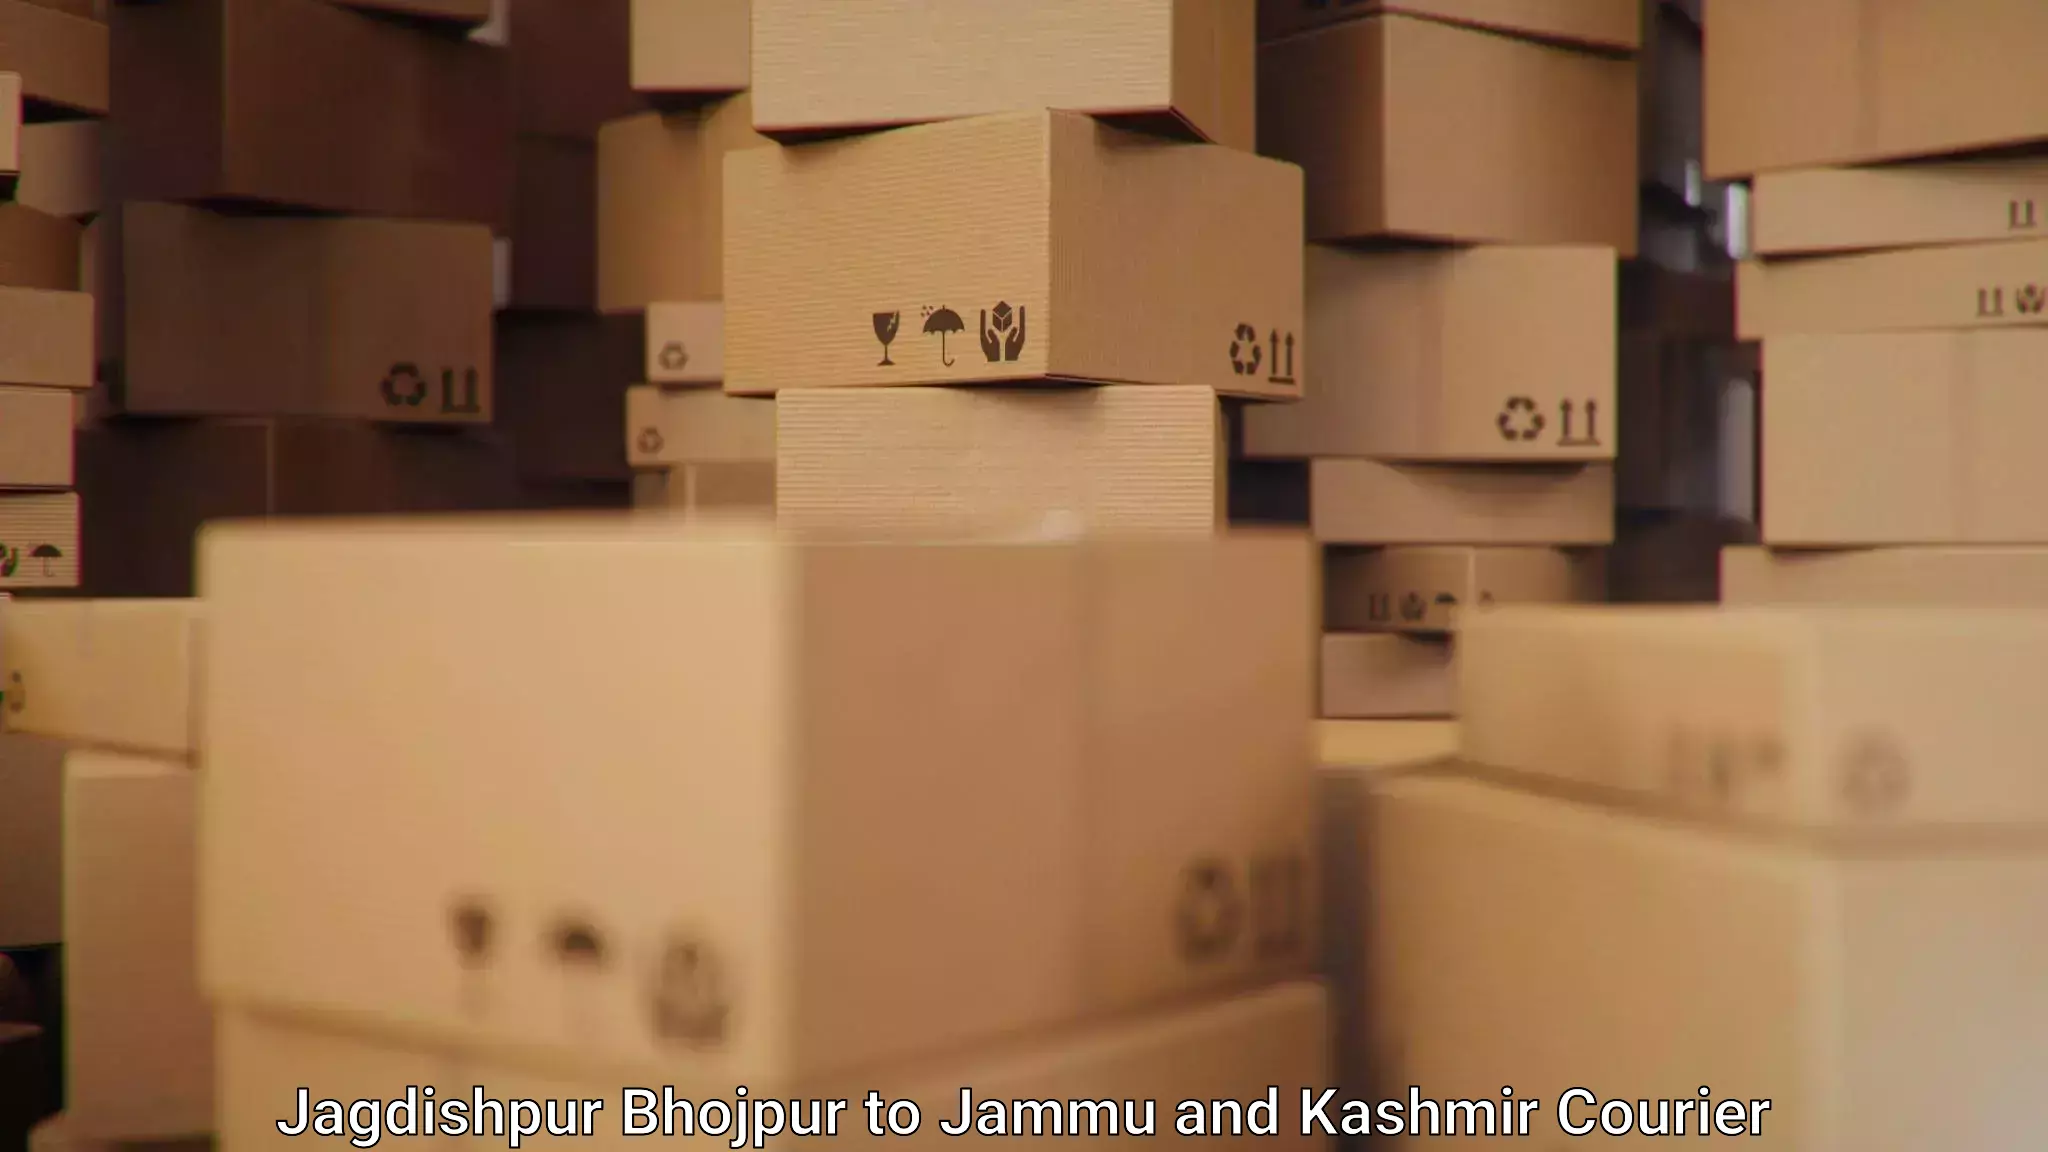 Secure freight services Jagdishpur Bhojpur to Baramulla